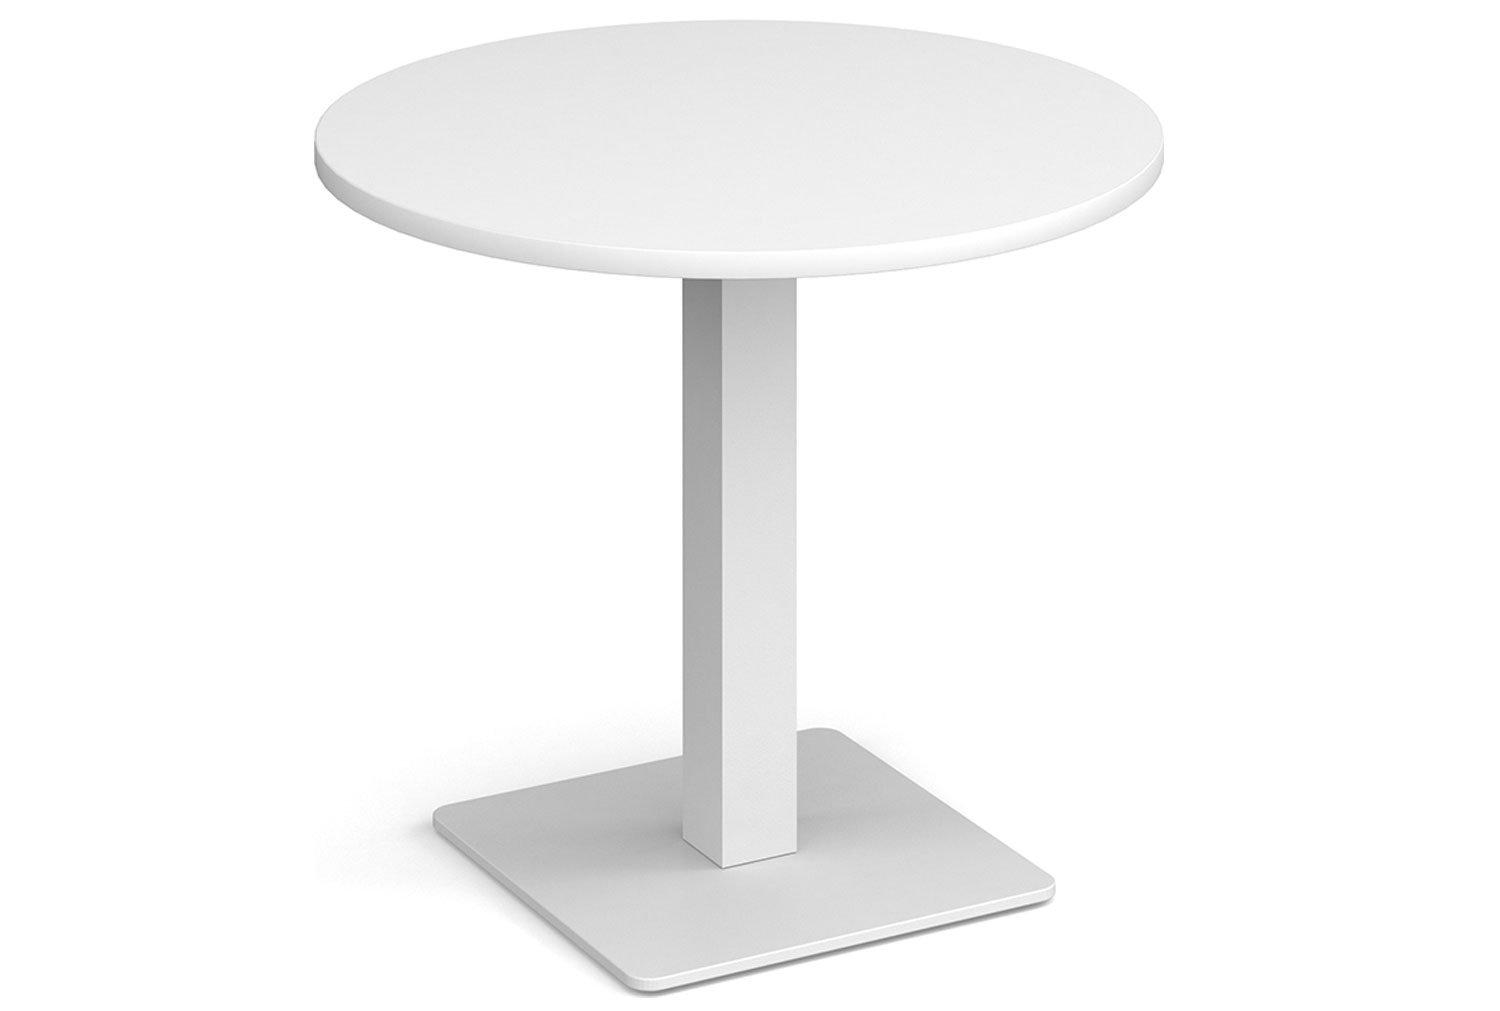 Chappell Circular Dining Table, 80diax73h (cm), White, Express Delivery